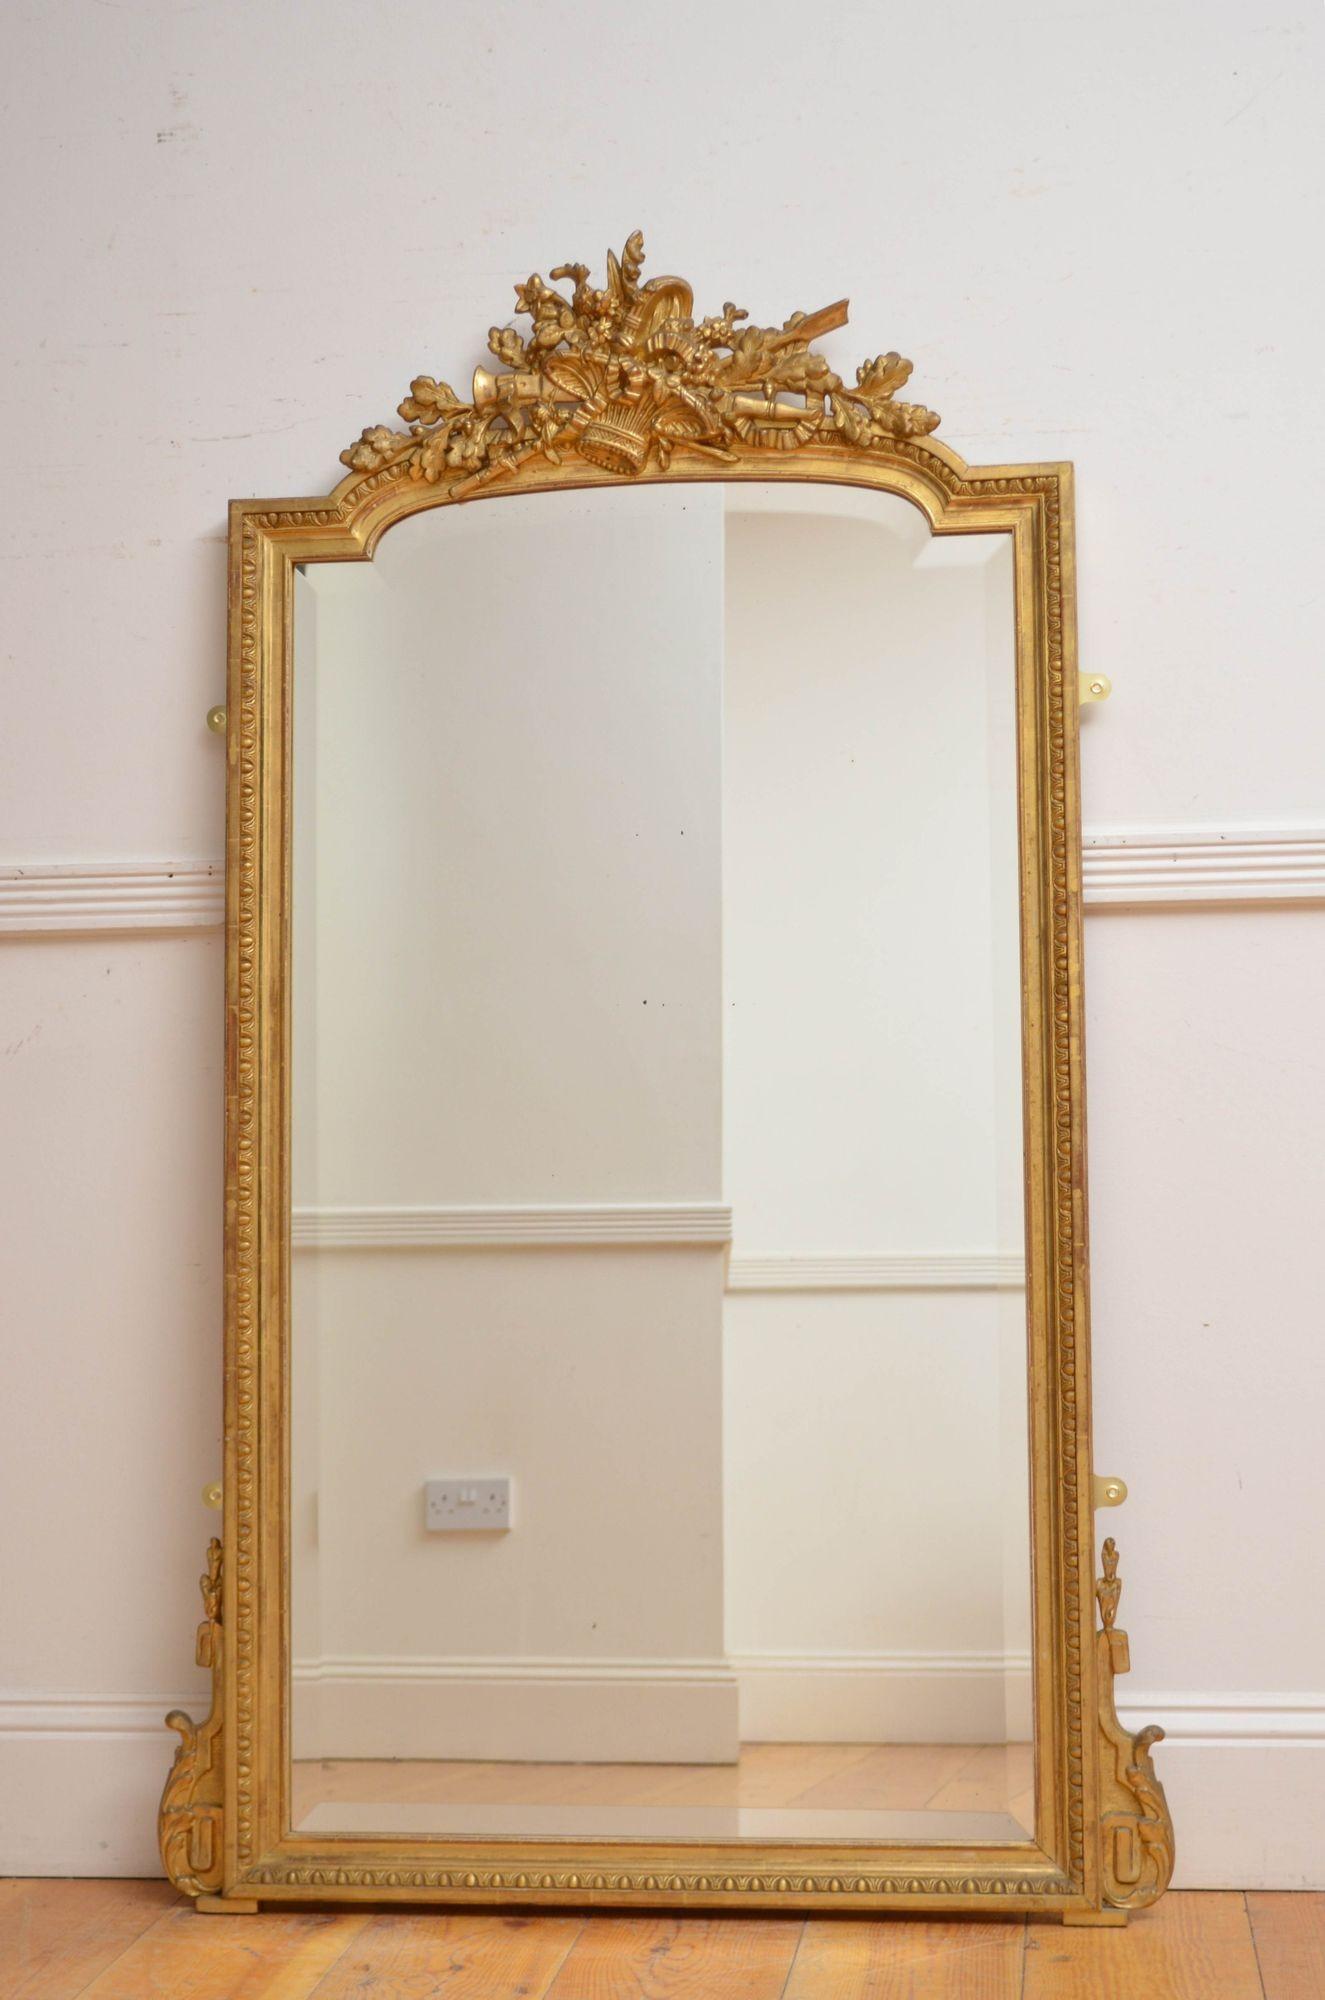 Sn5552 Attractive turn of the century French giltwood wall mirror or pier mirror, having original bevelled edge glass with some foxing in moulded and gilded frame with egg and dart moulding, leafy scrolls to the base and intricate centre crest with